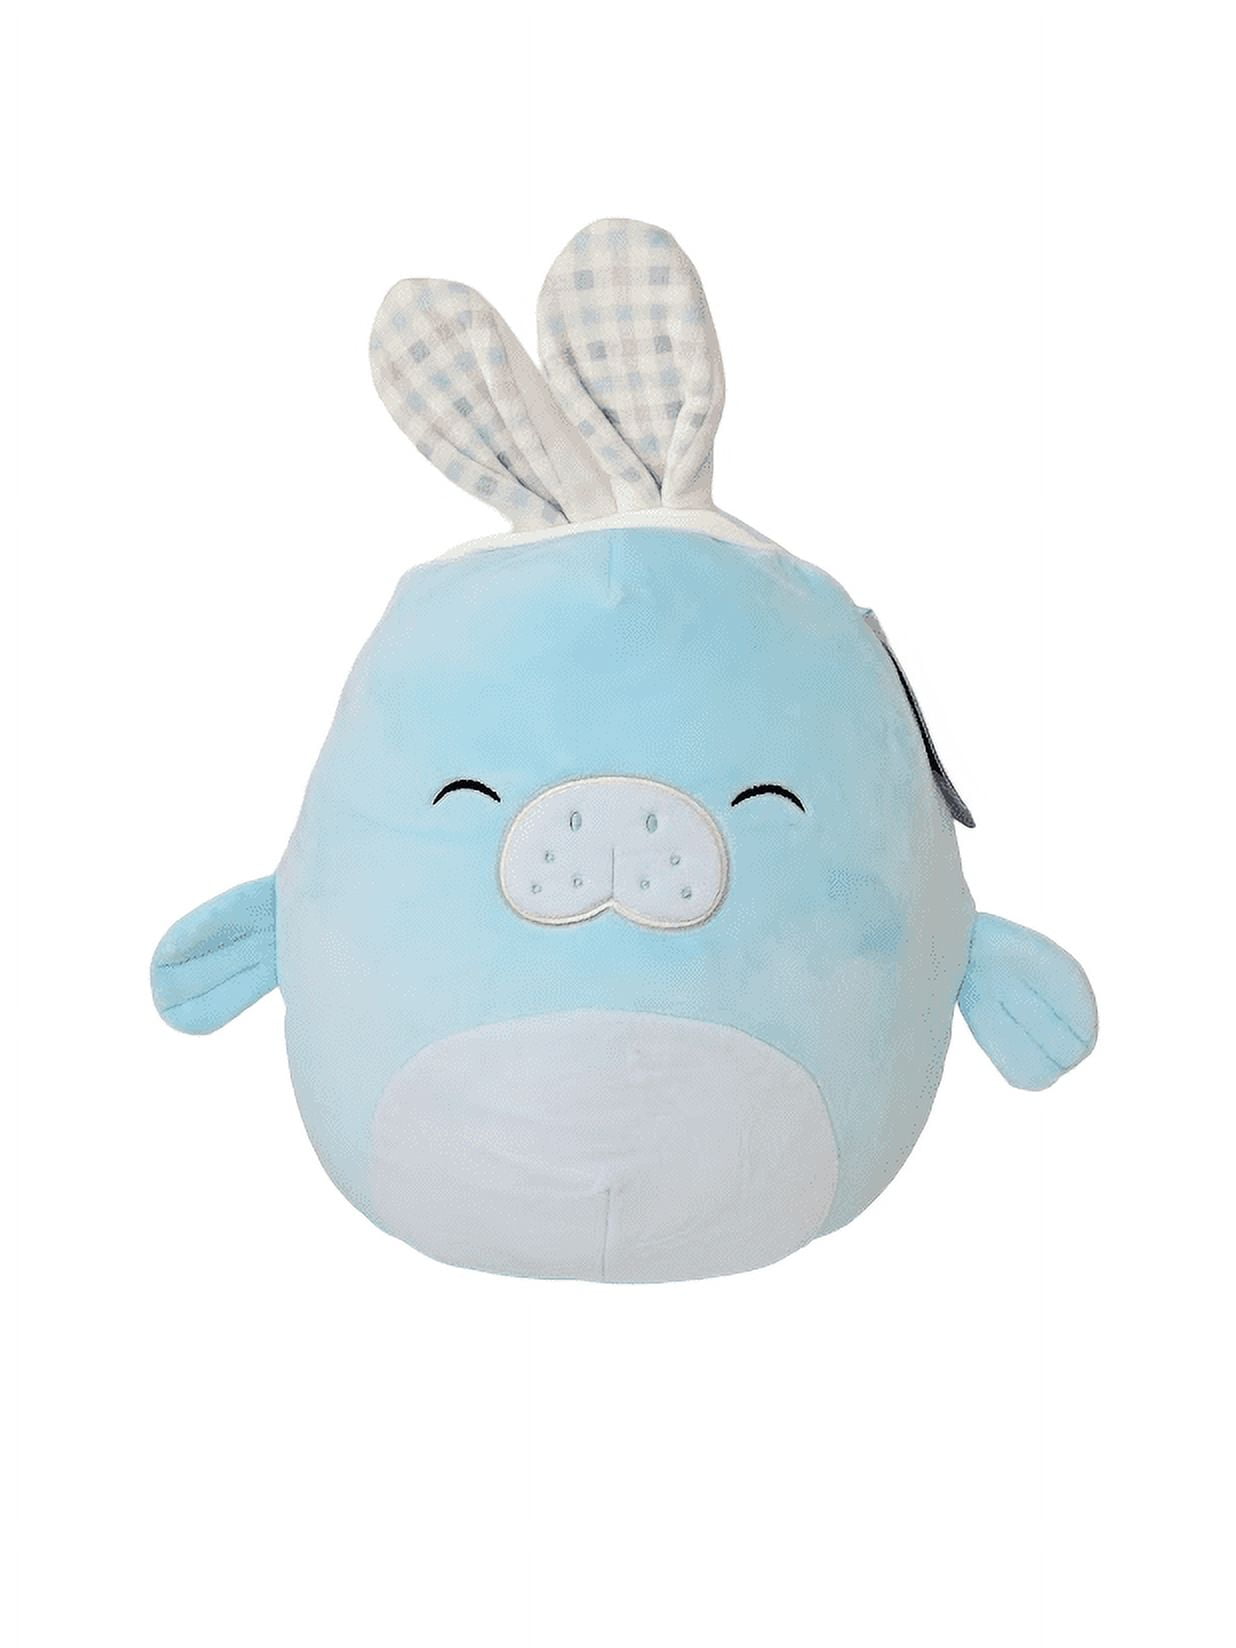  Squishmallow 12 Blake The Bunny - Officially Licensed